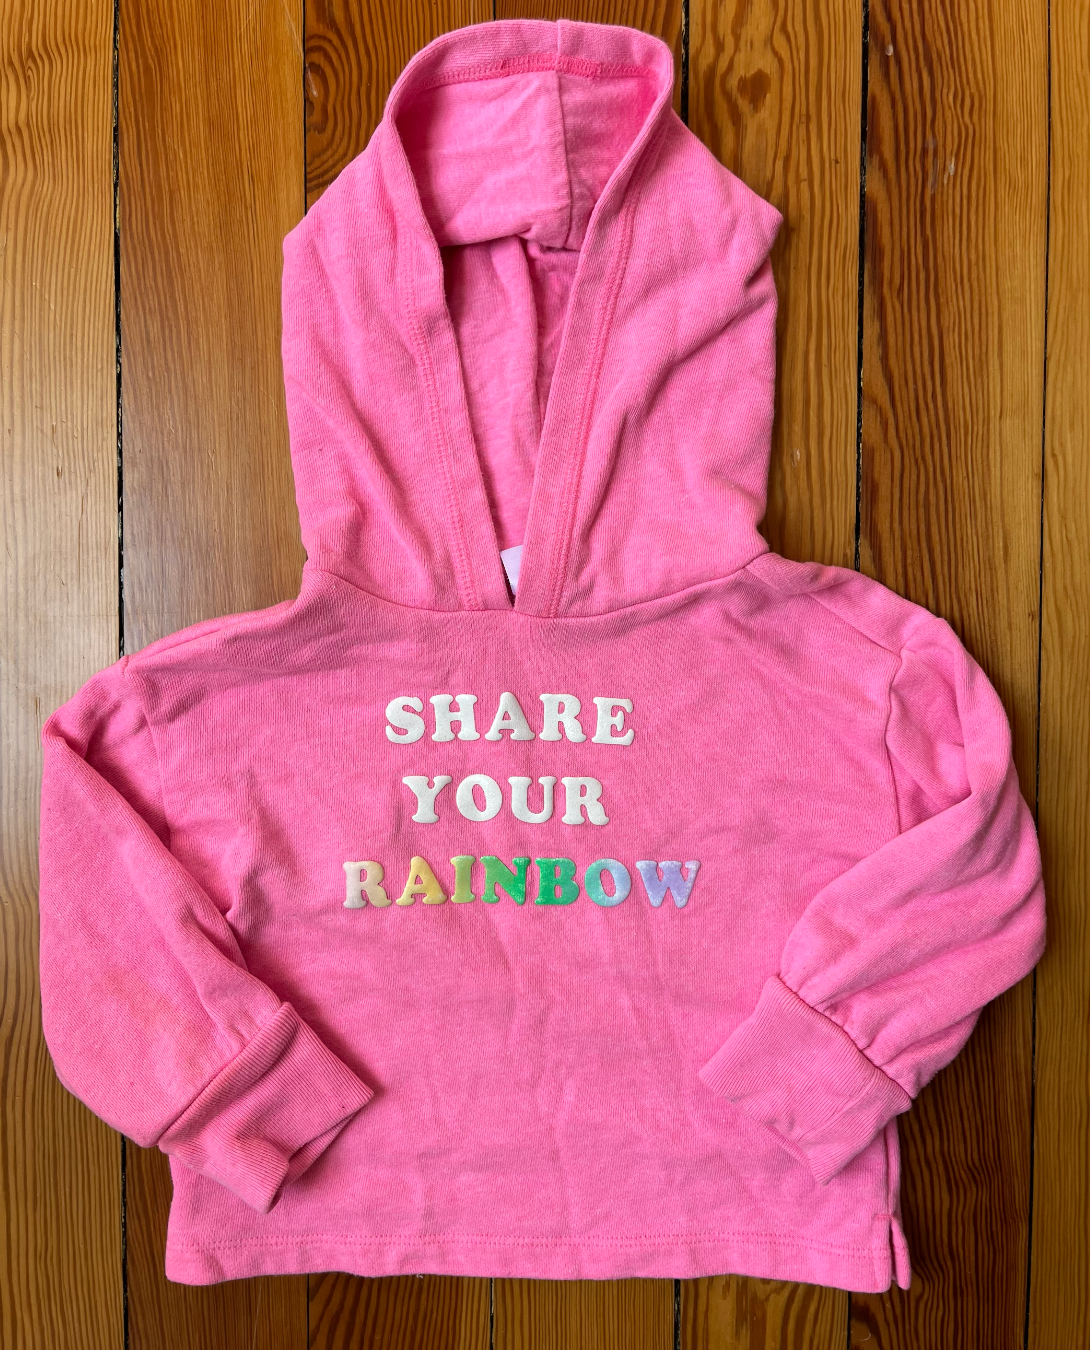 Baby Gap Pink Hooded "Share Your Rainbow" Sweatshirt - Size 3T - GUC